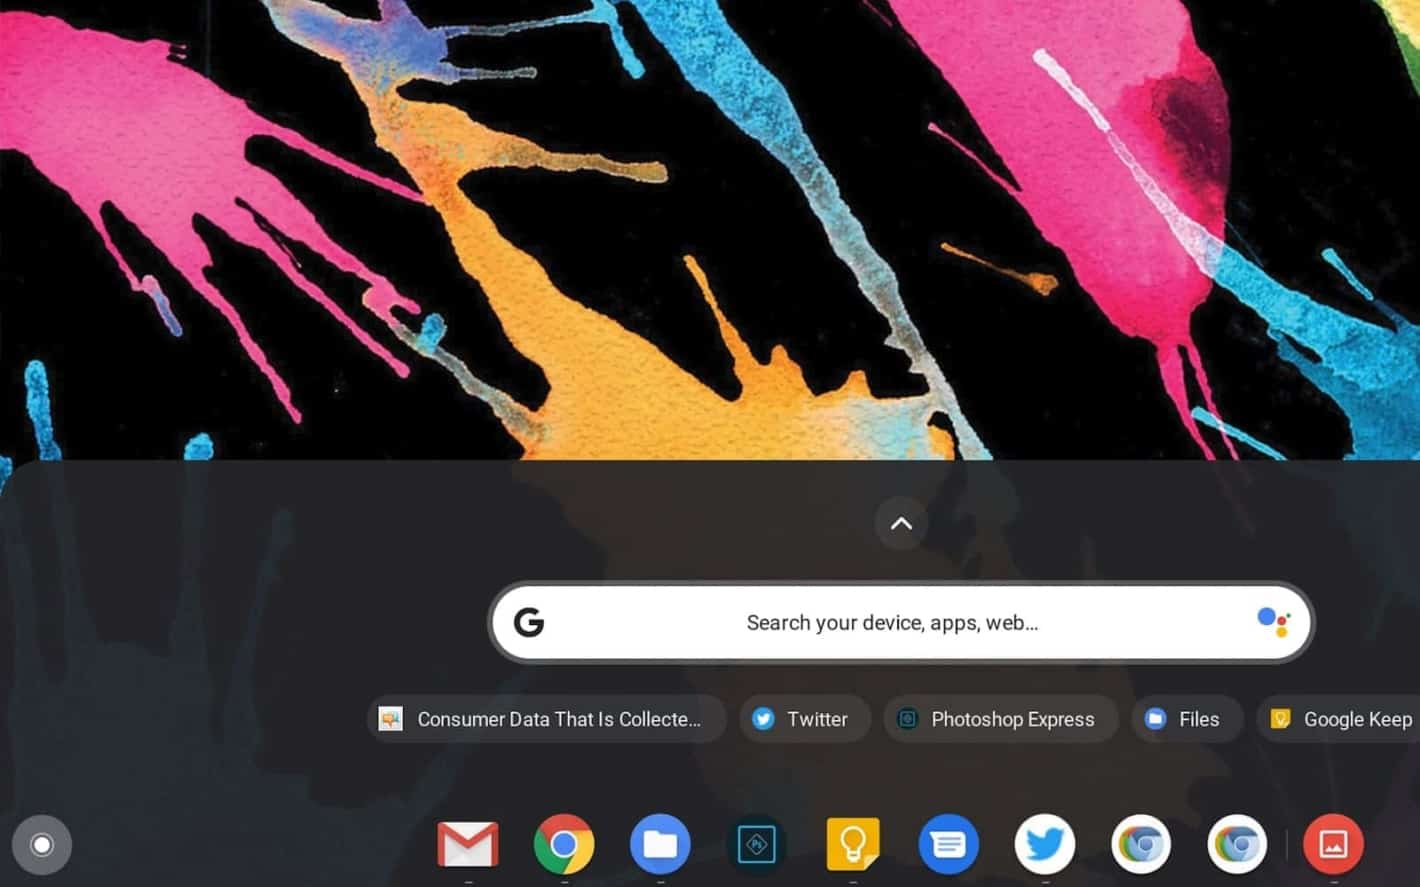 How to Make an Image Your Wallpaper on Chromebook